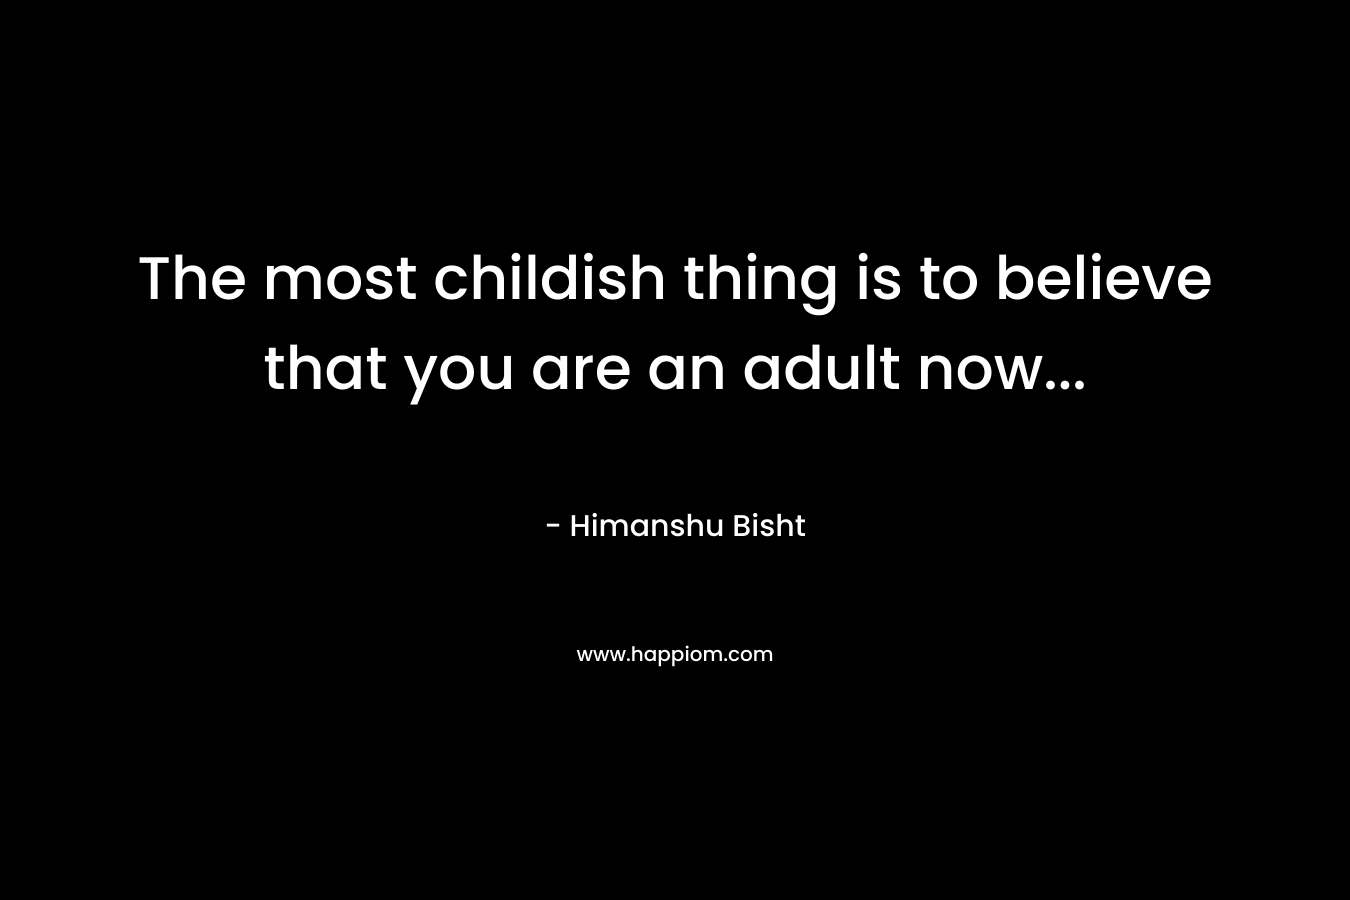 The most childish thing is to believe that you are an adult now...